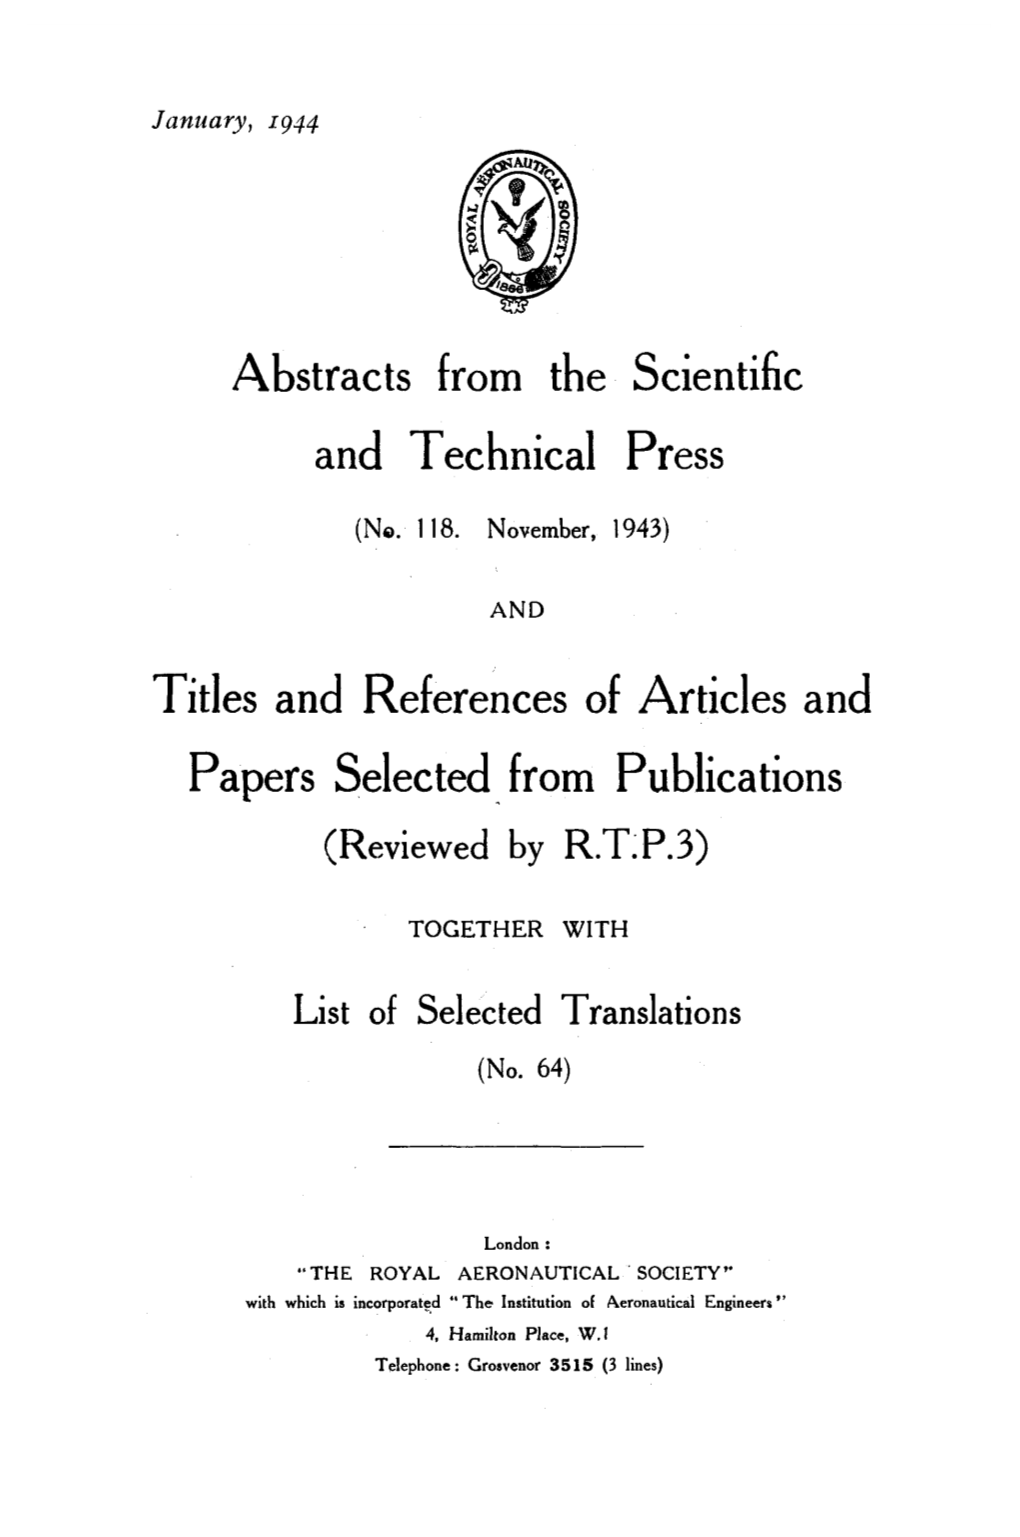 Abstracts from the Scientific and Technical Press Titles and References of Articles and Papers Selected from Publications